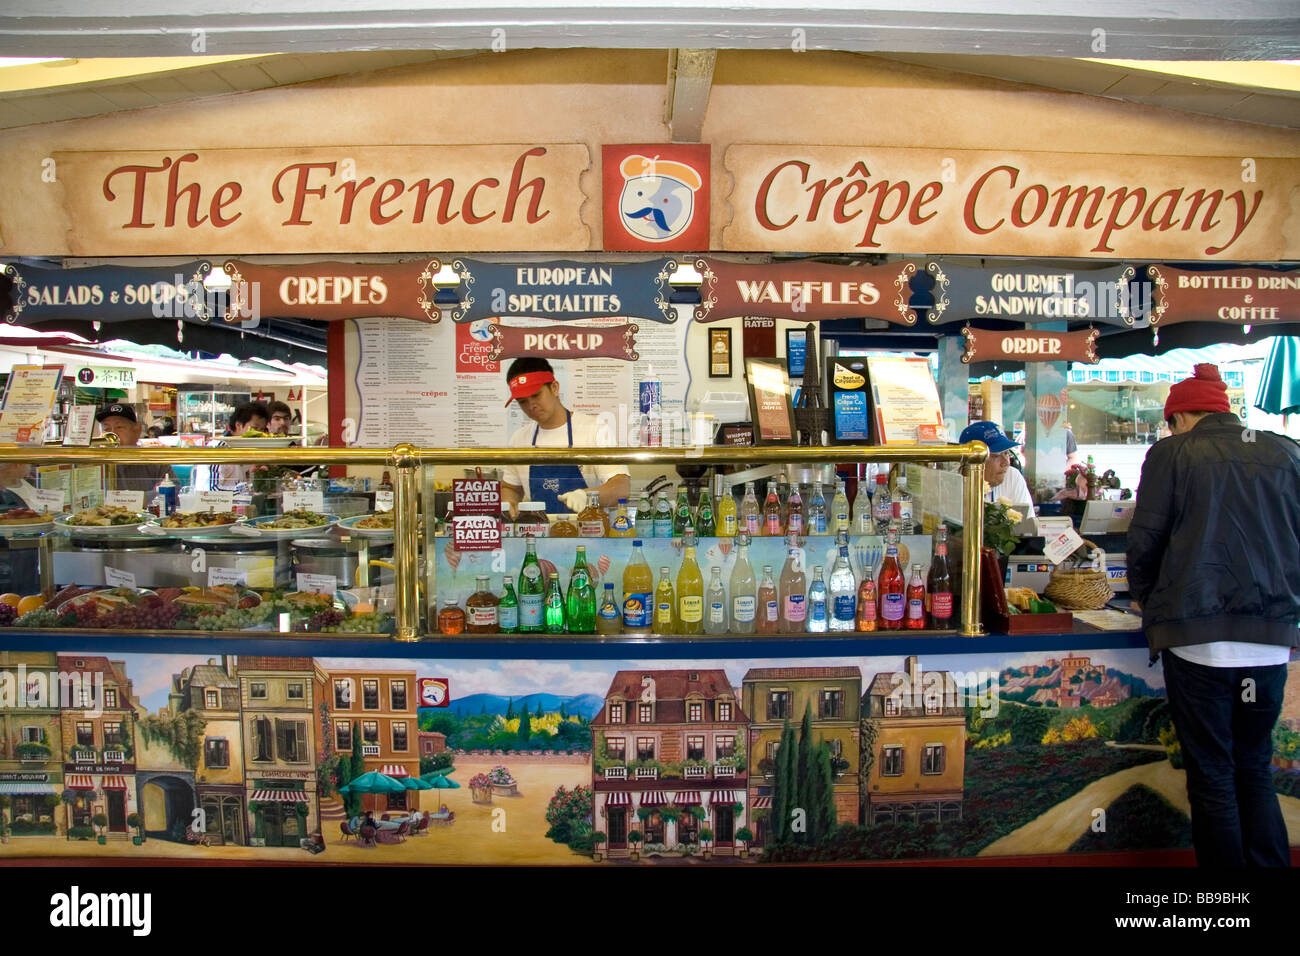 The French Crepe Company inside the Farmers Market in Hollywood Los Angeles California USA Stock Photo